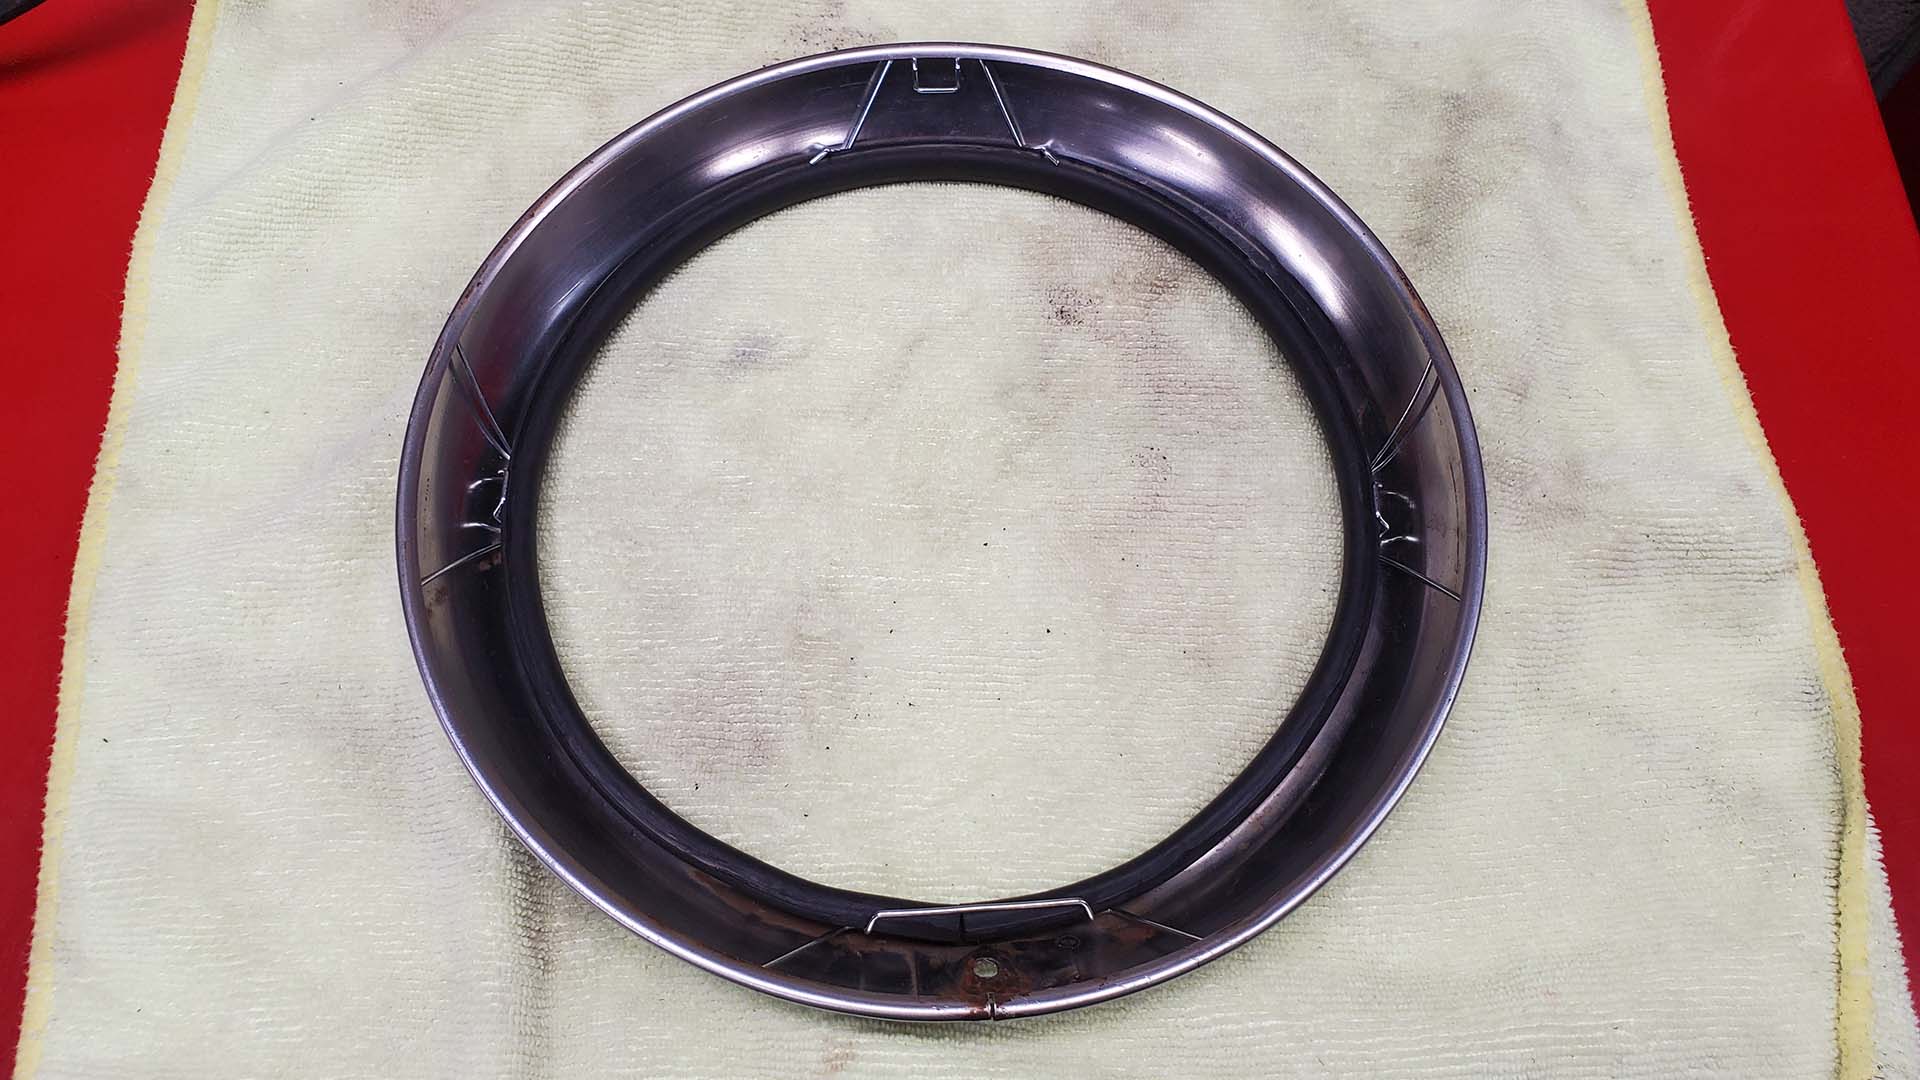 Headlight trim ring, seal, and fiddly retainers